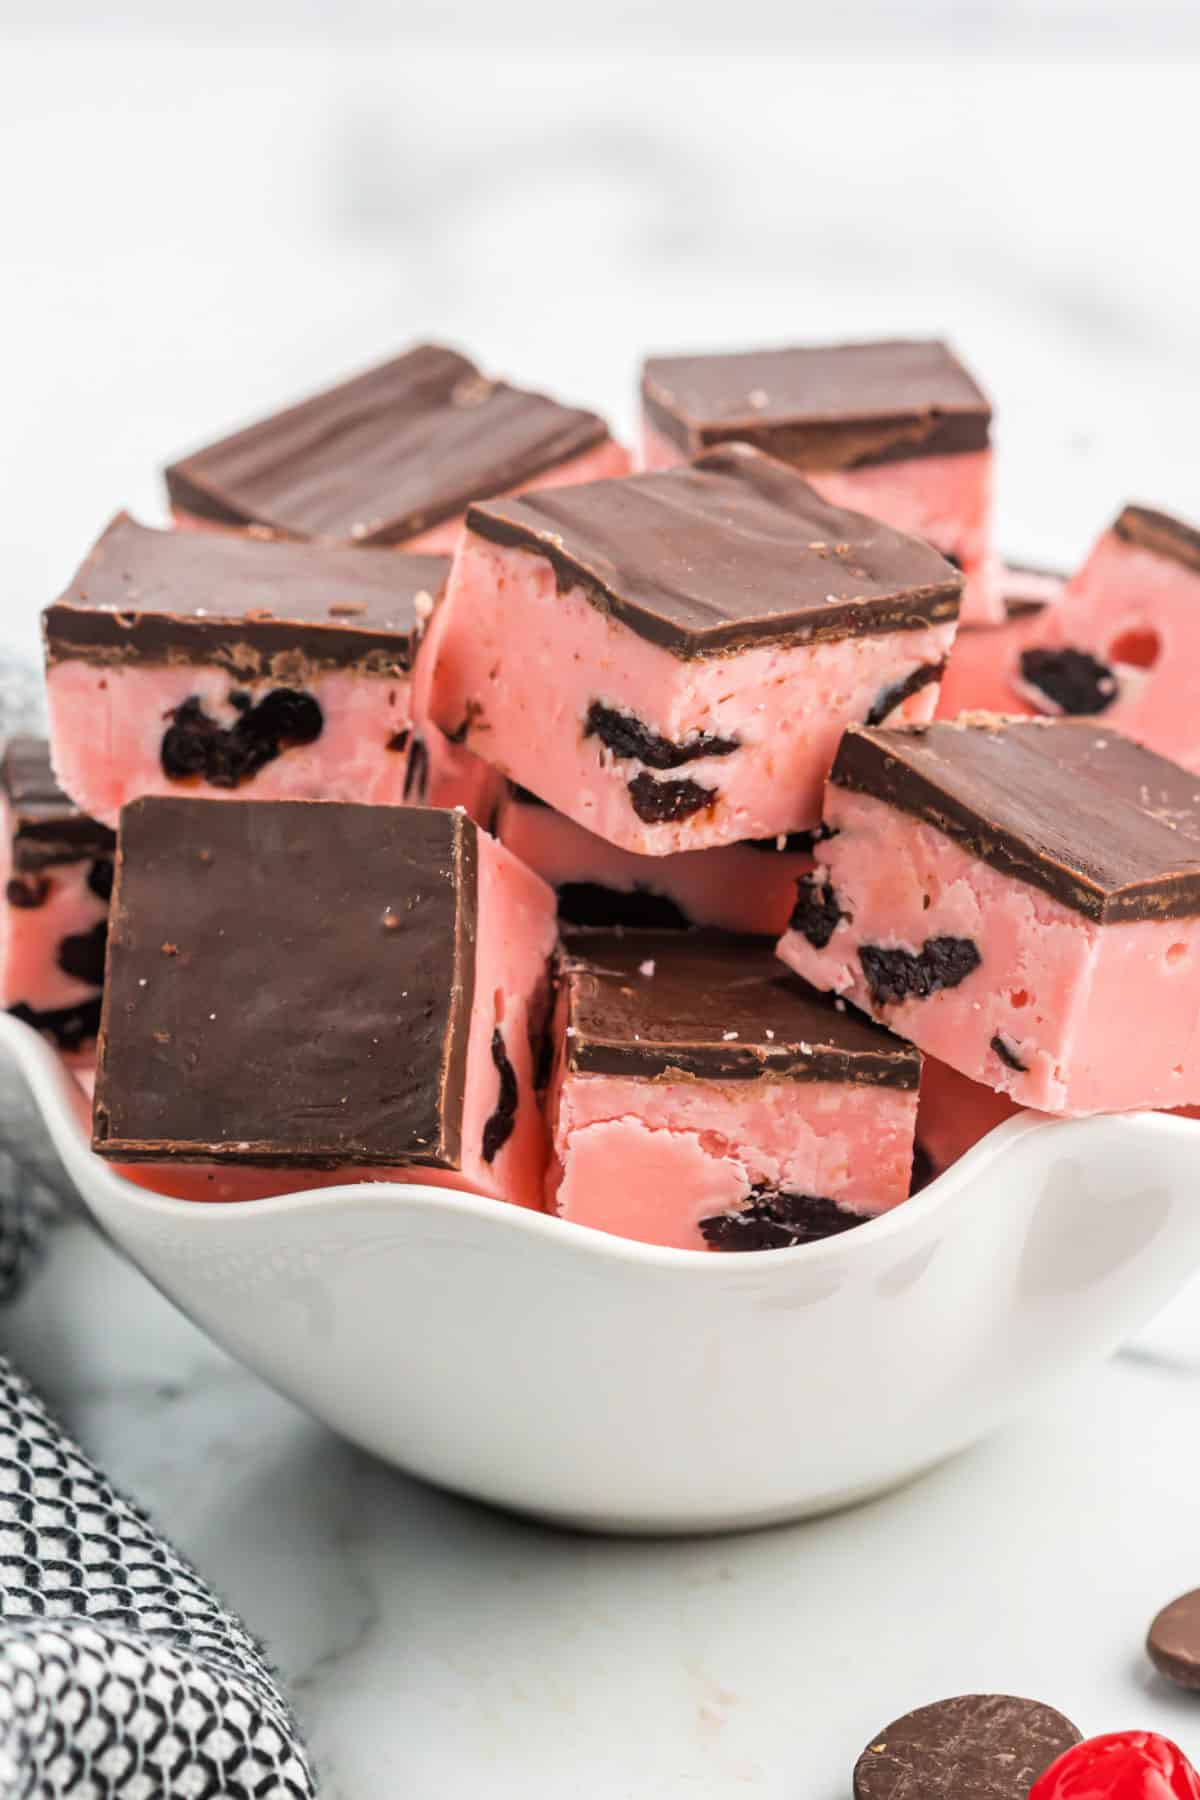 Cherry fudge cut into squares and served in a scalloped white bowl.